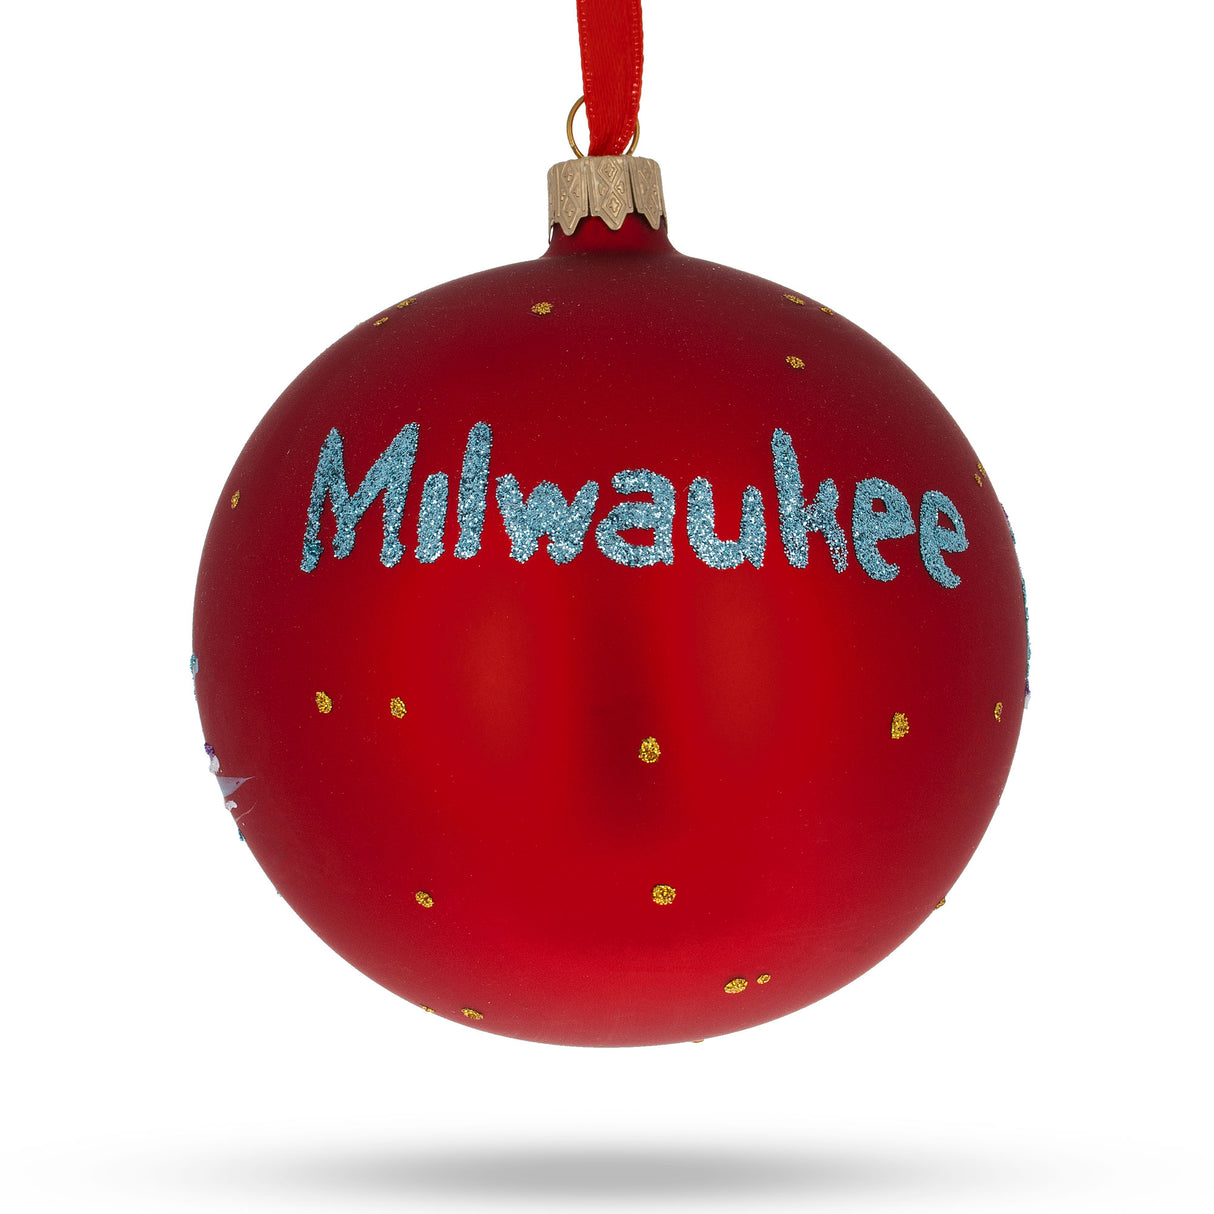 Buy Christmas Ornaments > Travel > North America > USA > Wisconsin by BestPysanky Online Gift Ship